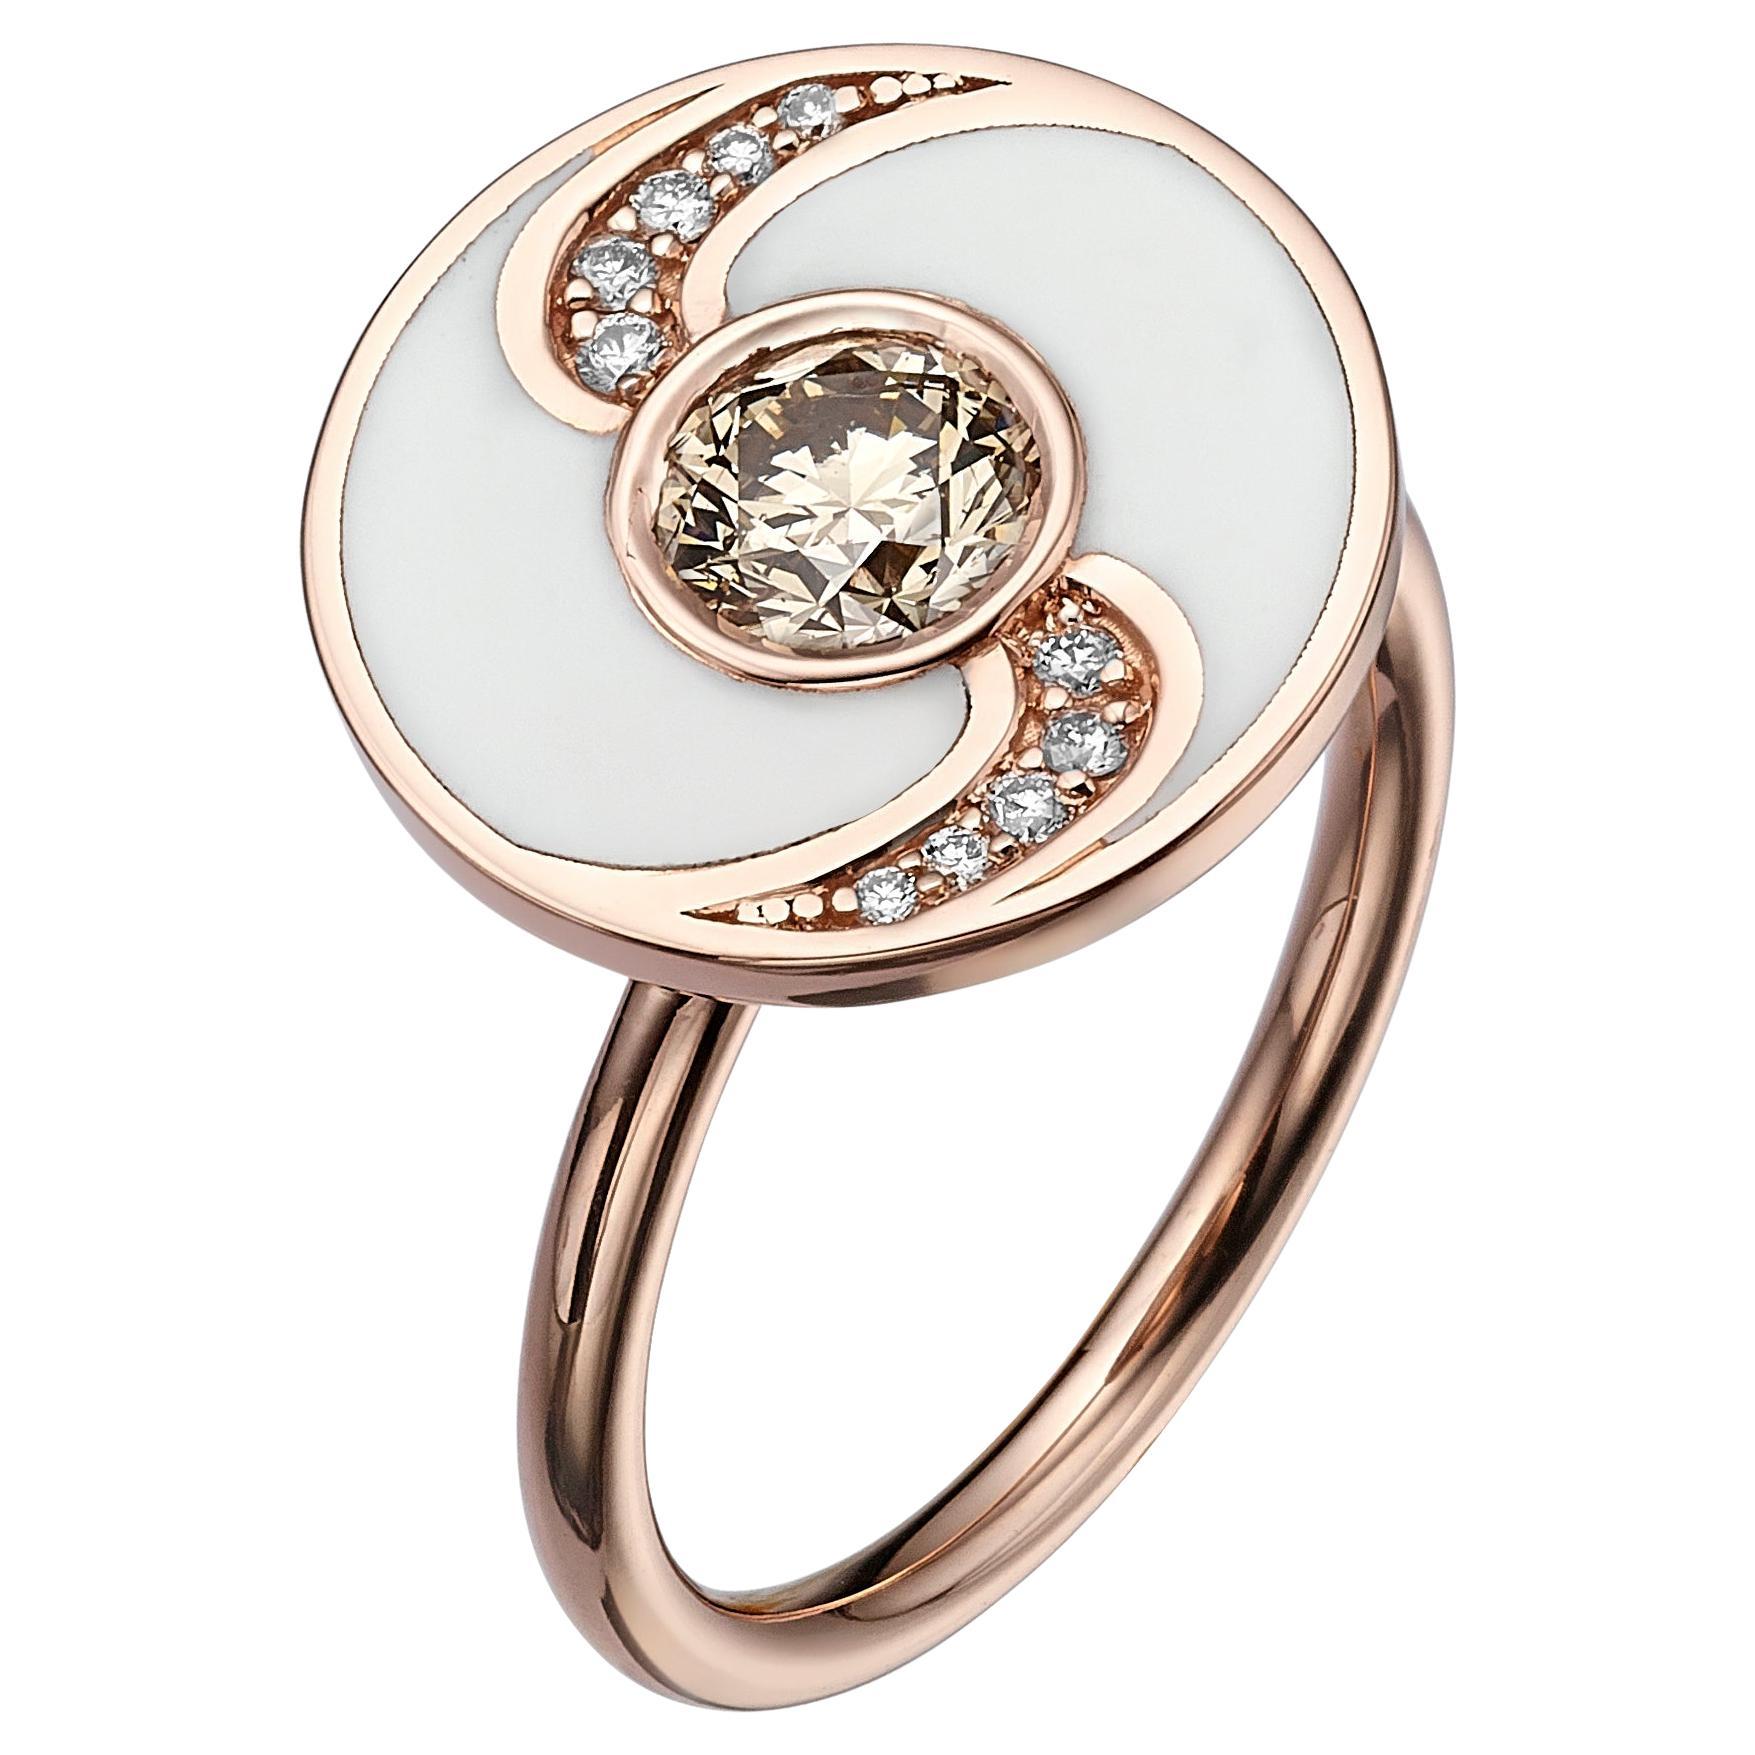 Venice Collection: Round Shaped 18k Rose Gold Diamond Ring with White Enamel For Sale